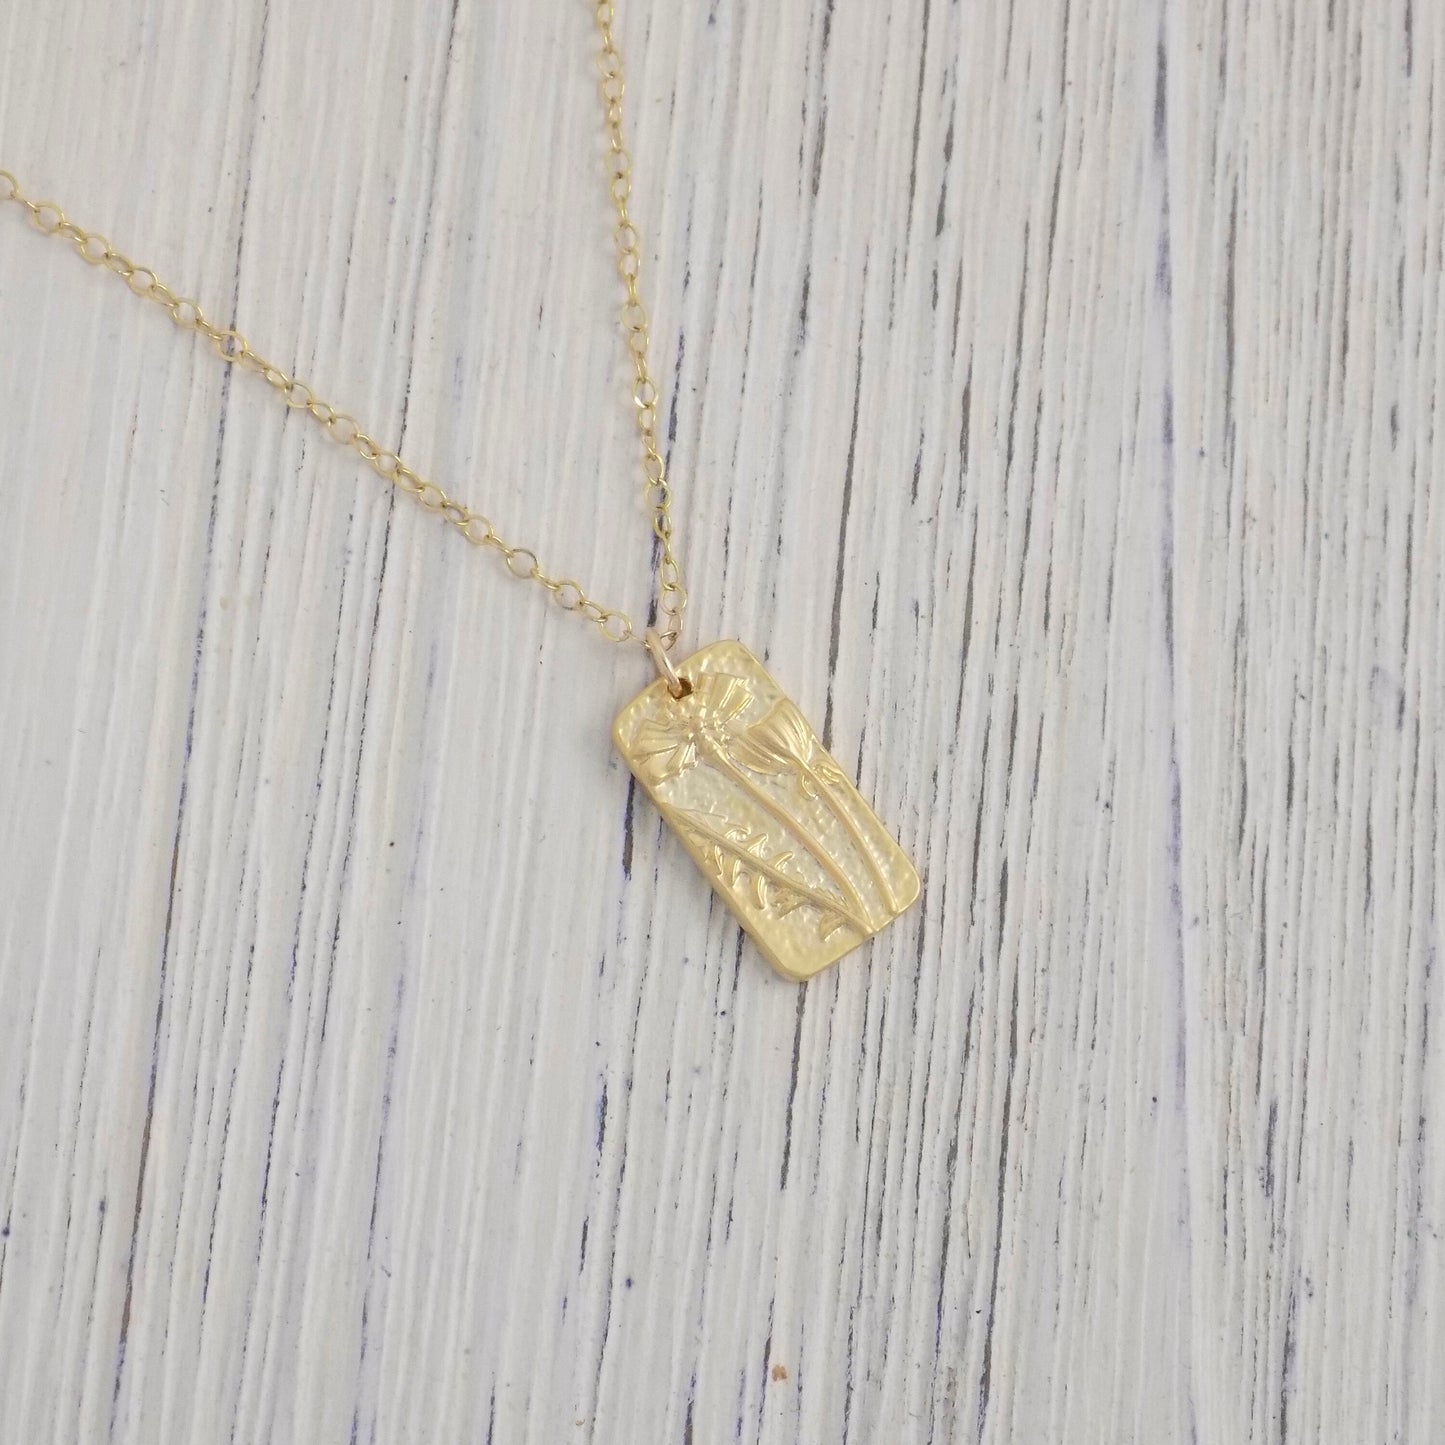 Gold Flower Necklace - Small Tag Necklace